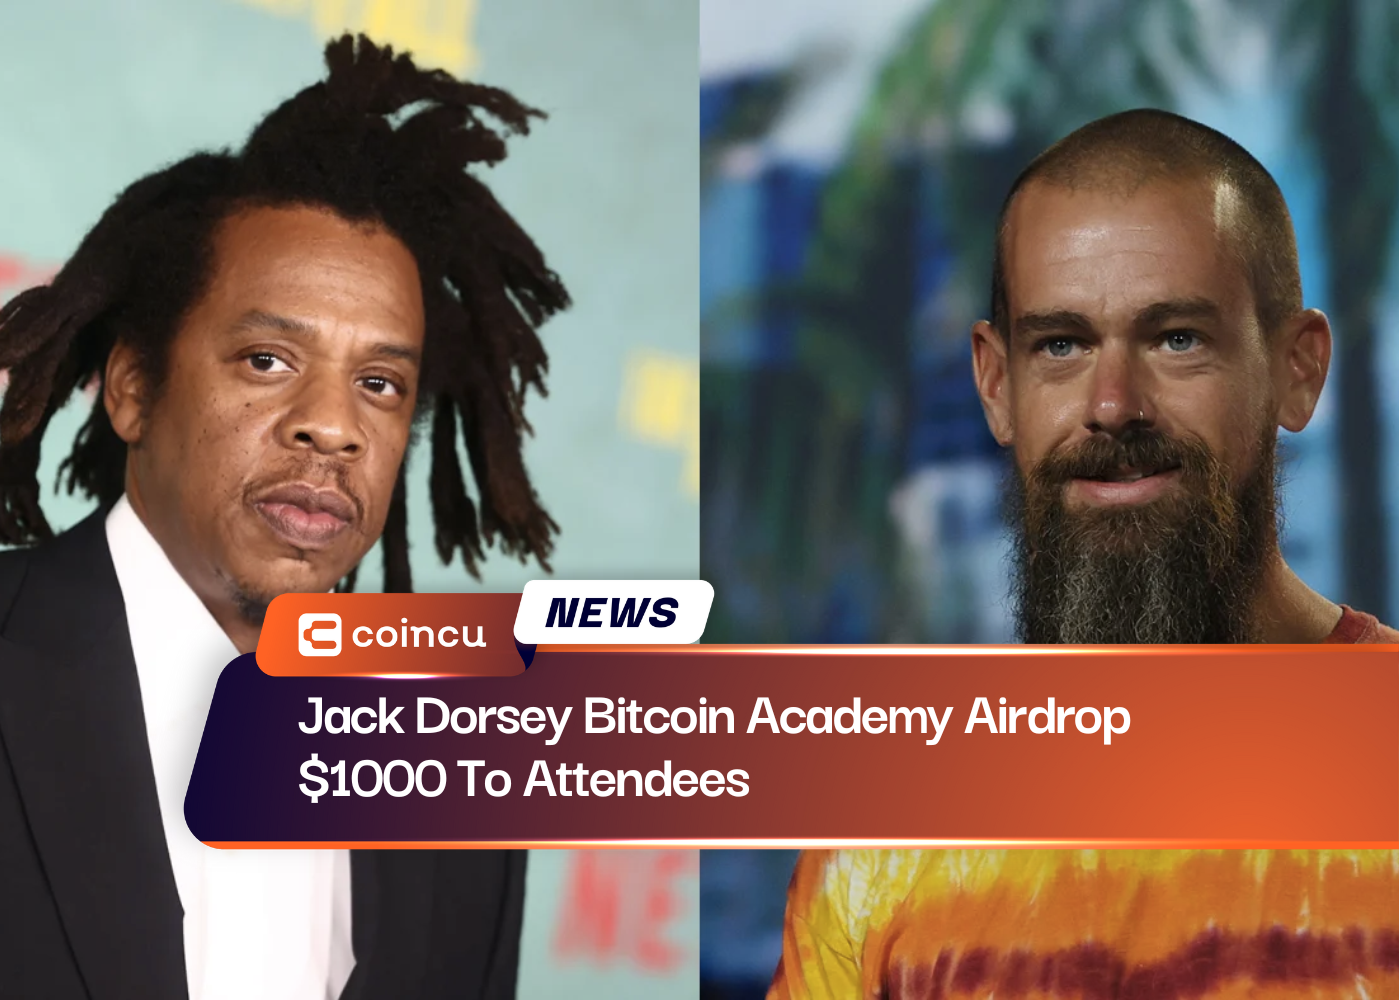 Jack Dorsey Bitcoin Academy Airdrop $1000 To Attendees